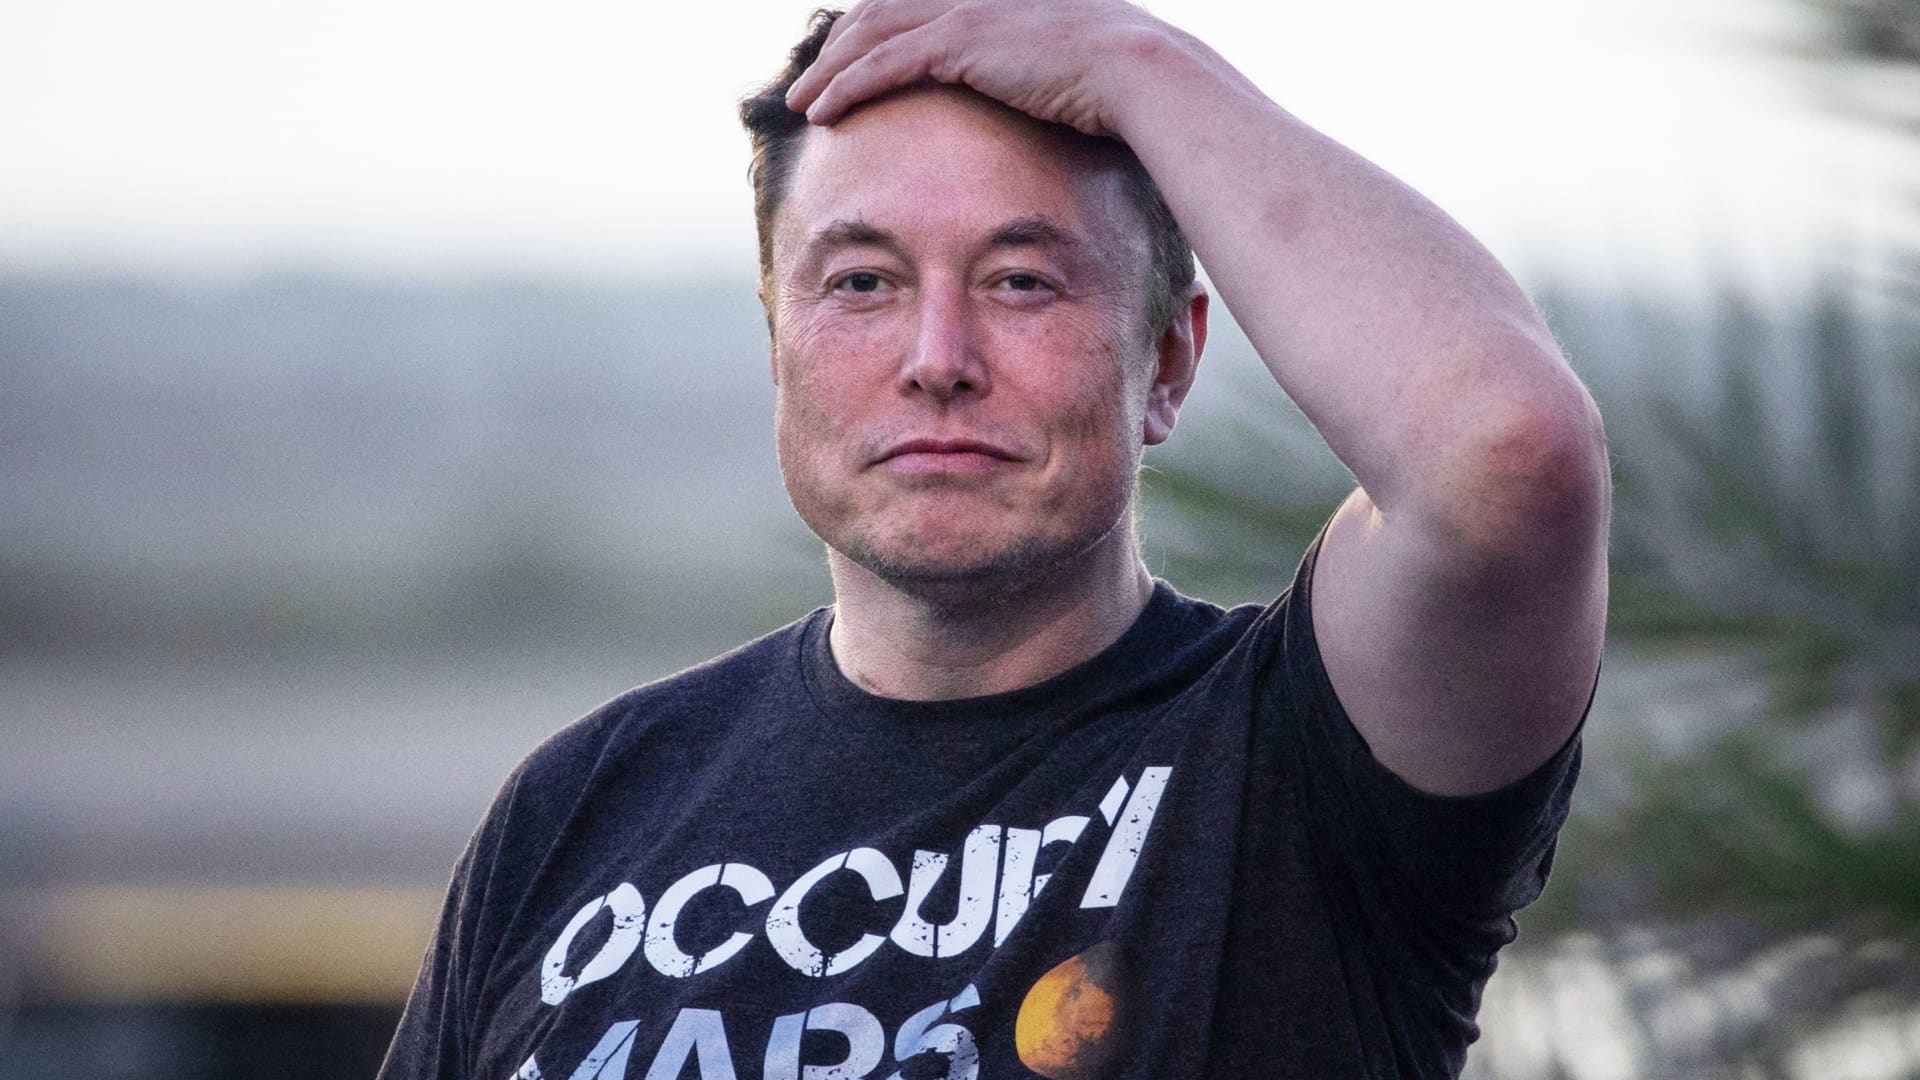 Apple and Elon Musk's Twitter are on a collision course